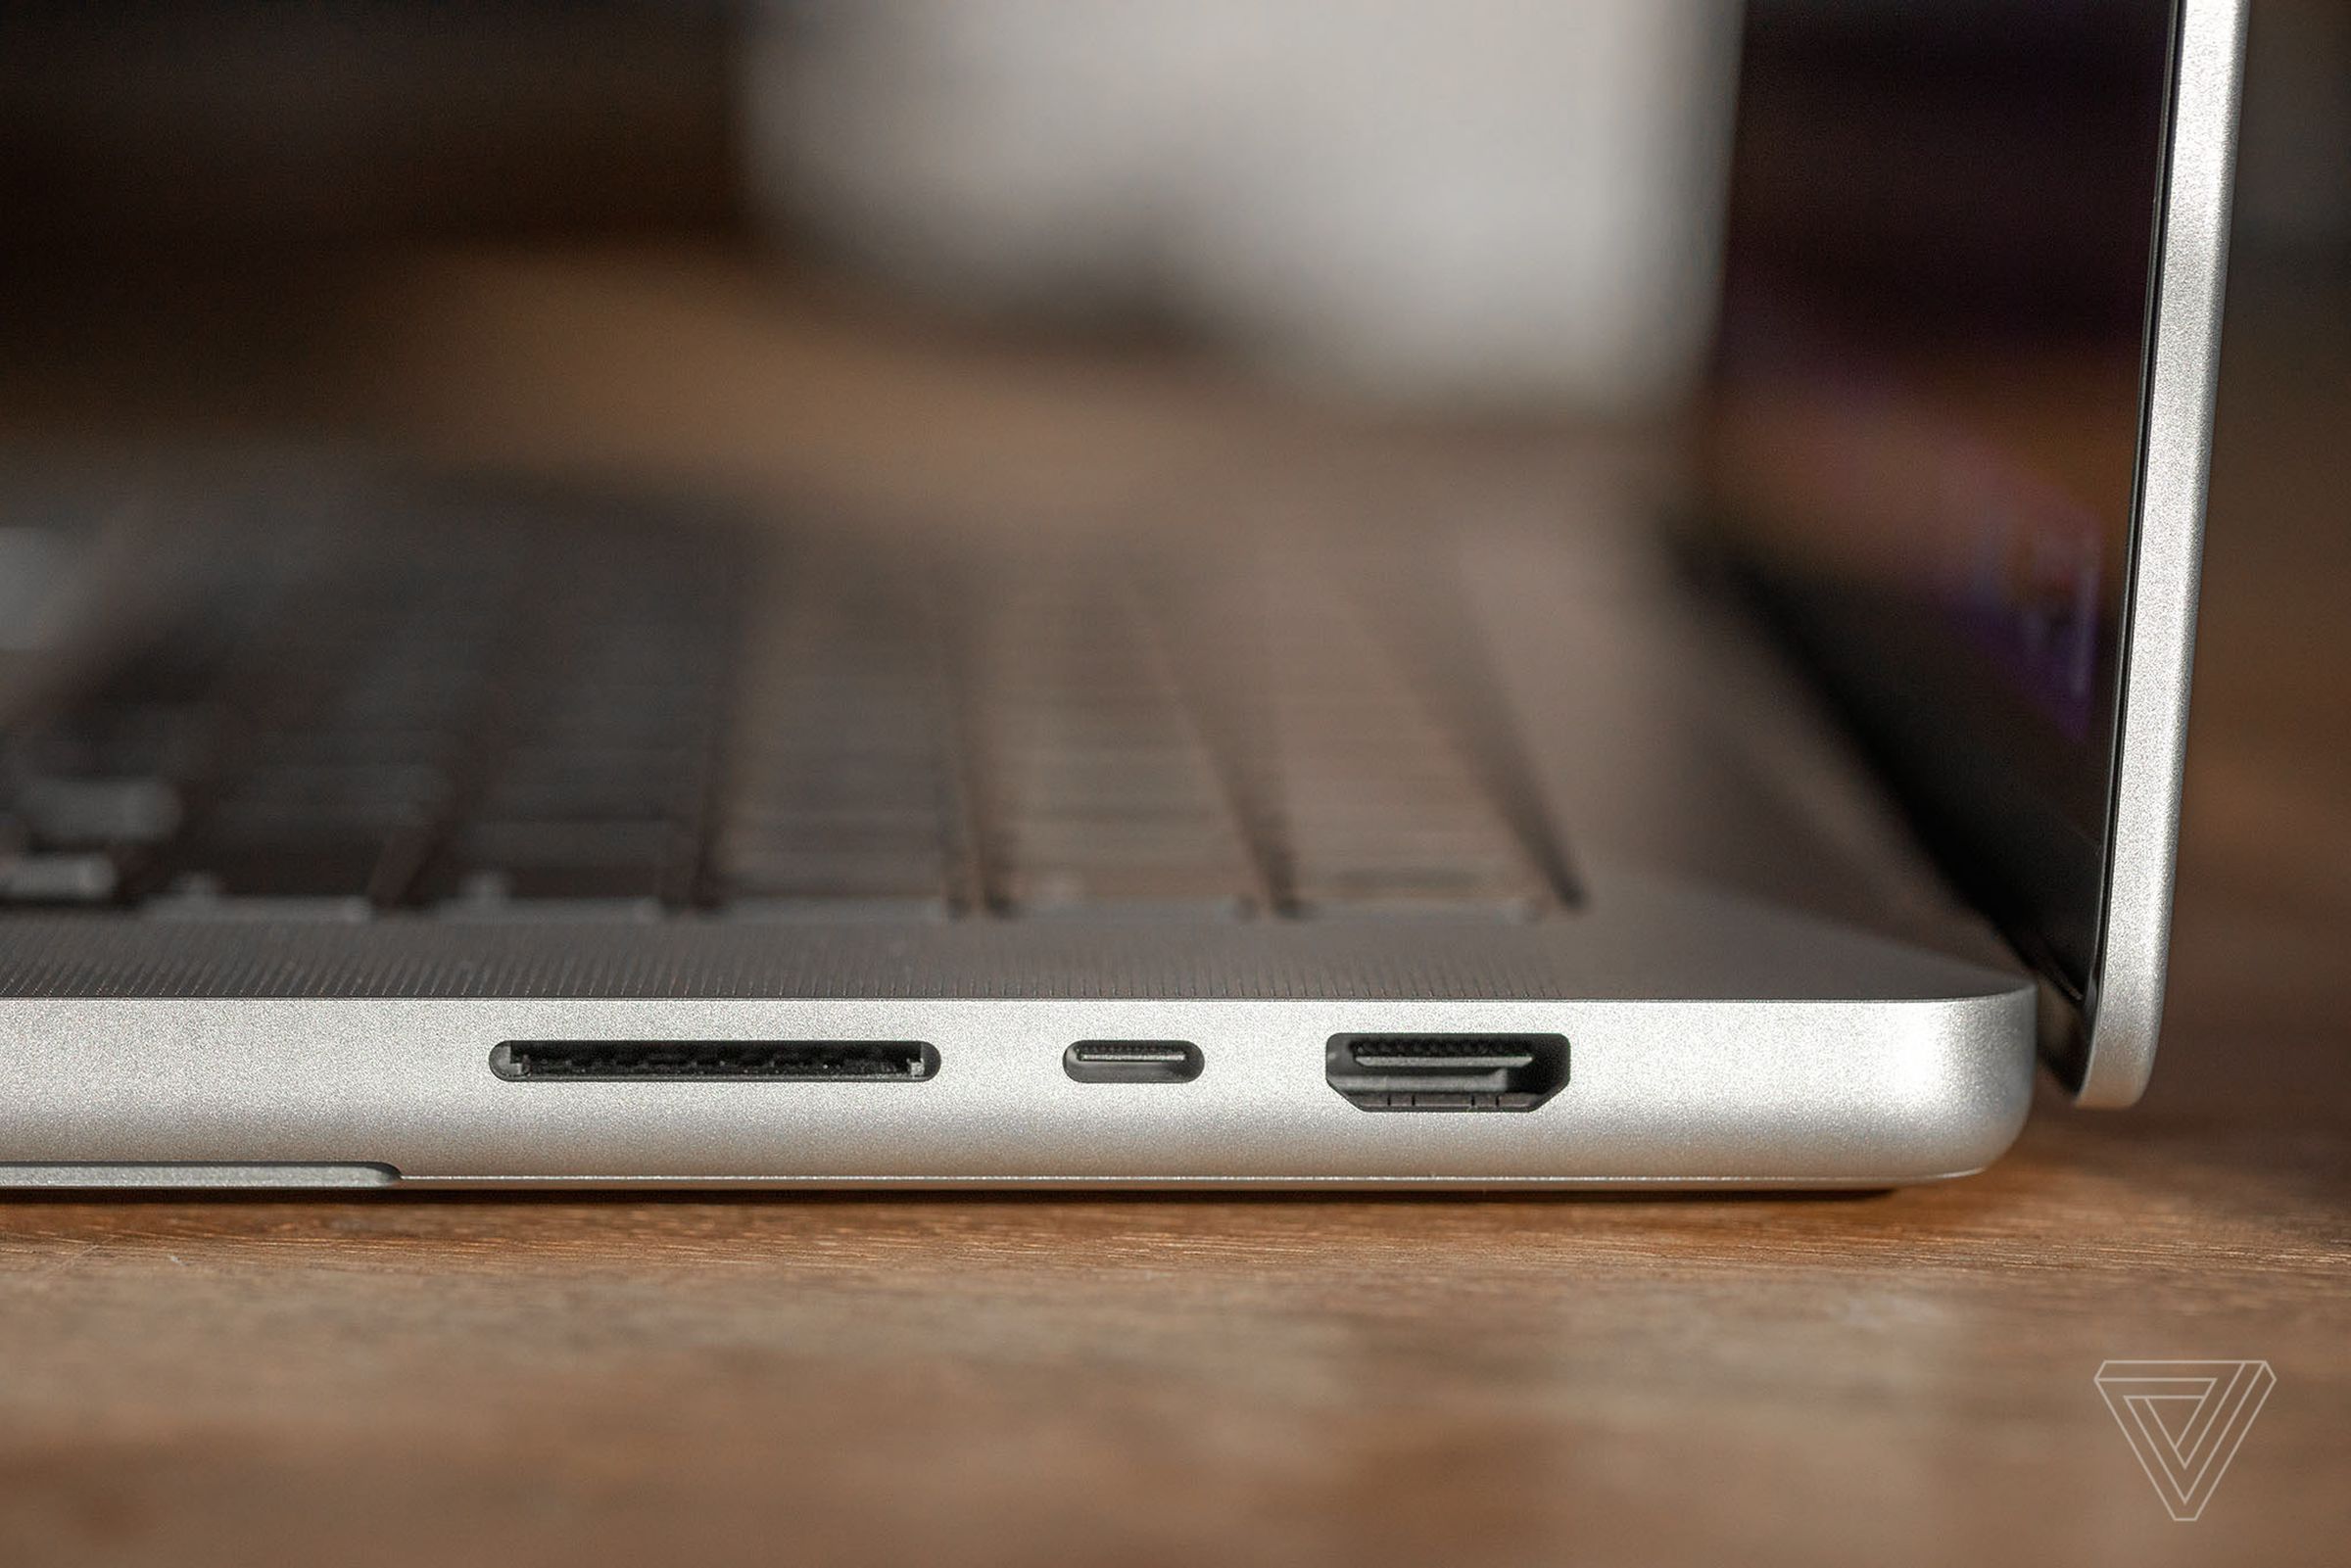 HDMI and SD card slot on the new MacBook Pro